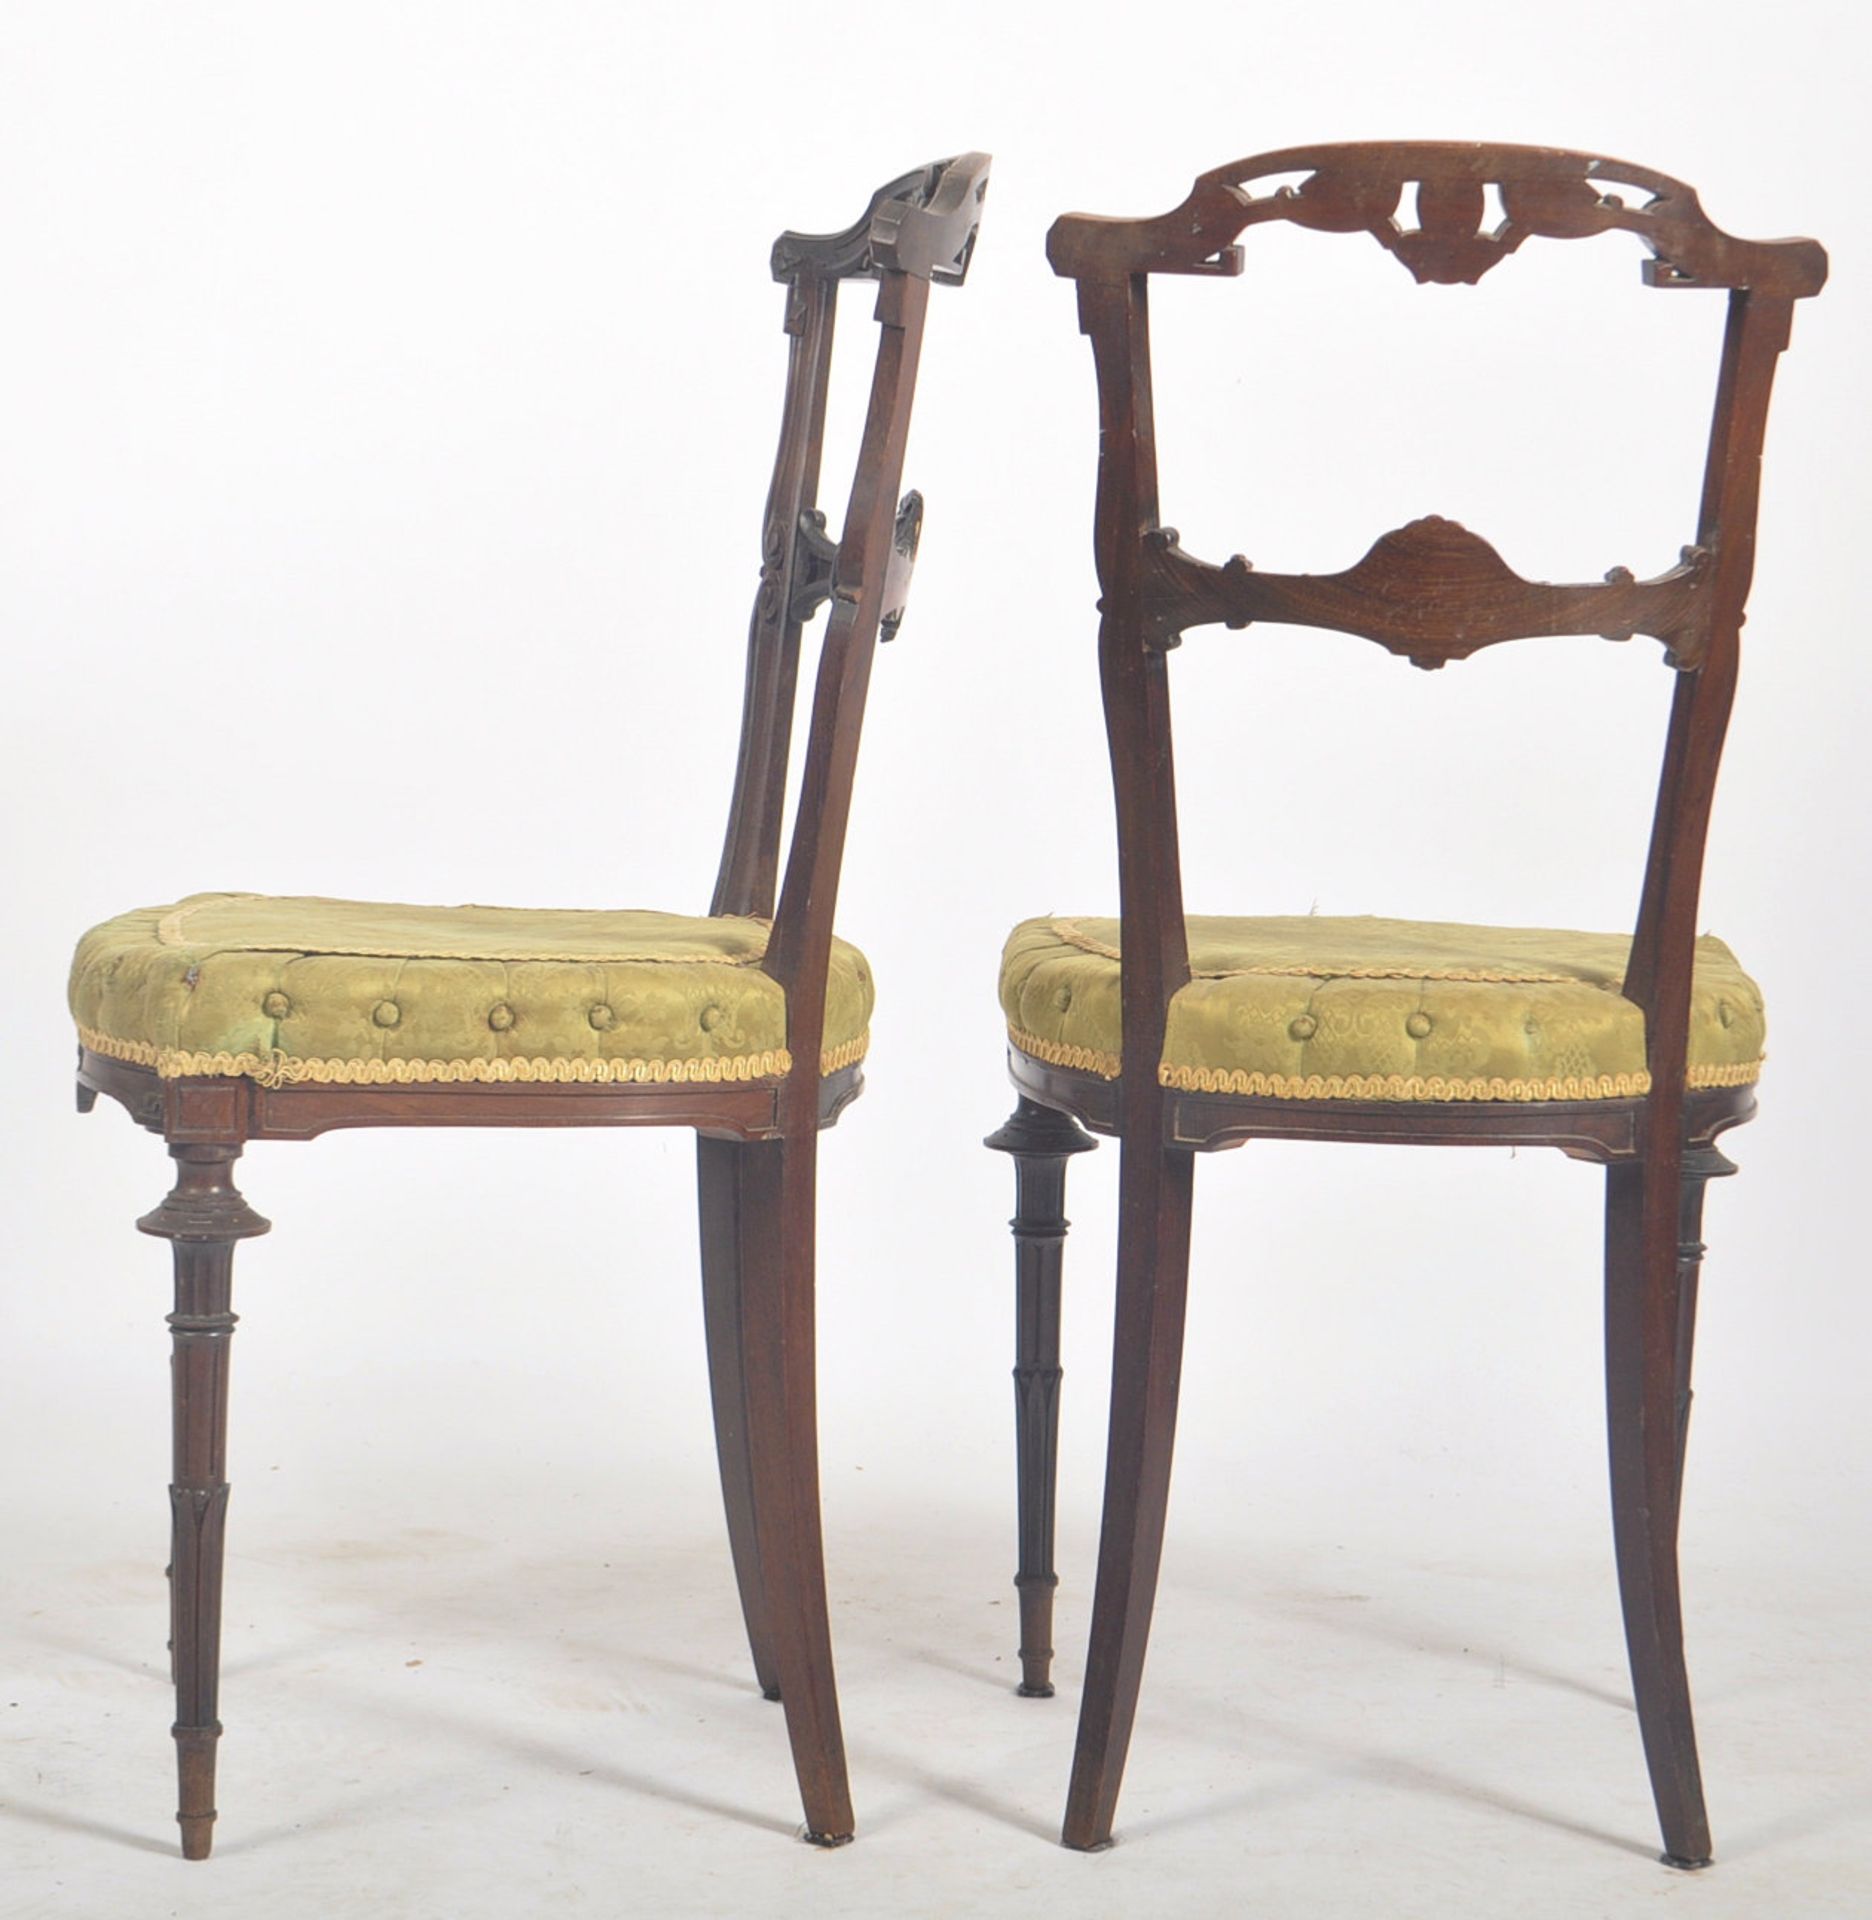 PAIR OF LATE VICTORIAN MAHOGANY HOWARD & SONS CHAIRS - Image 3 of 6